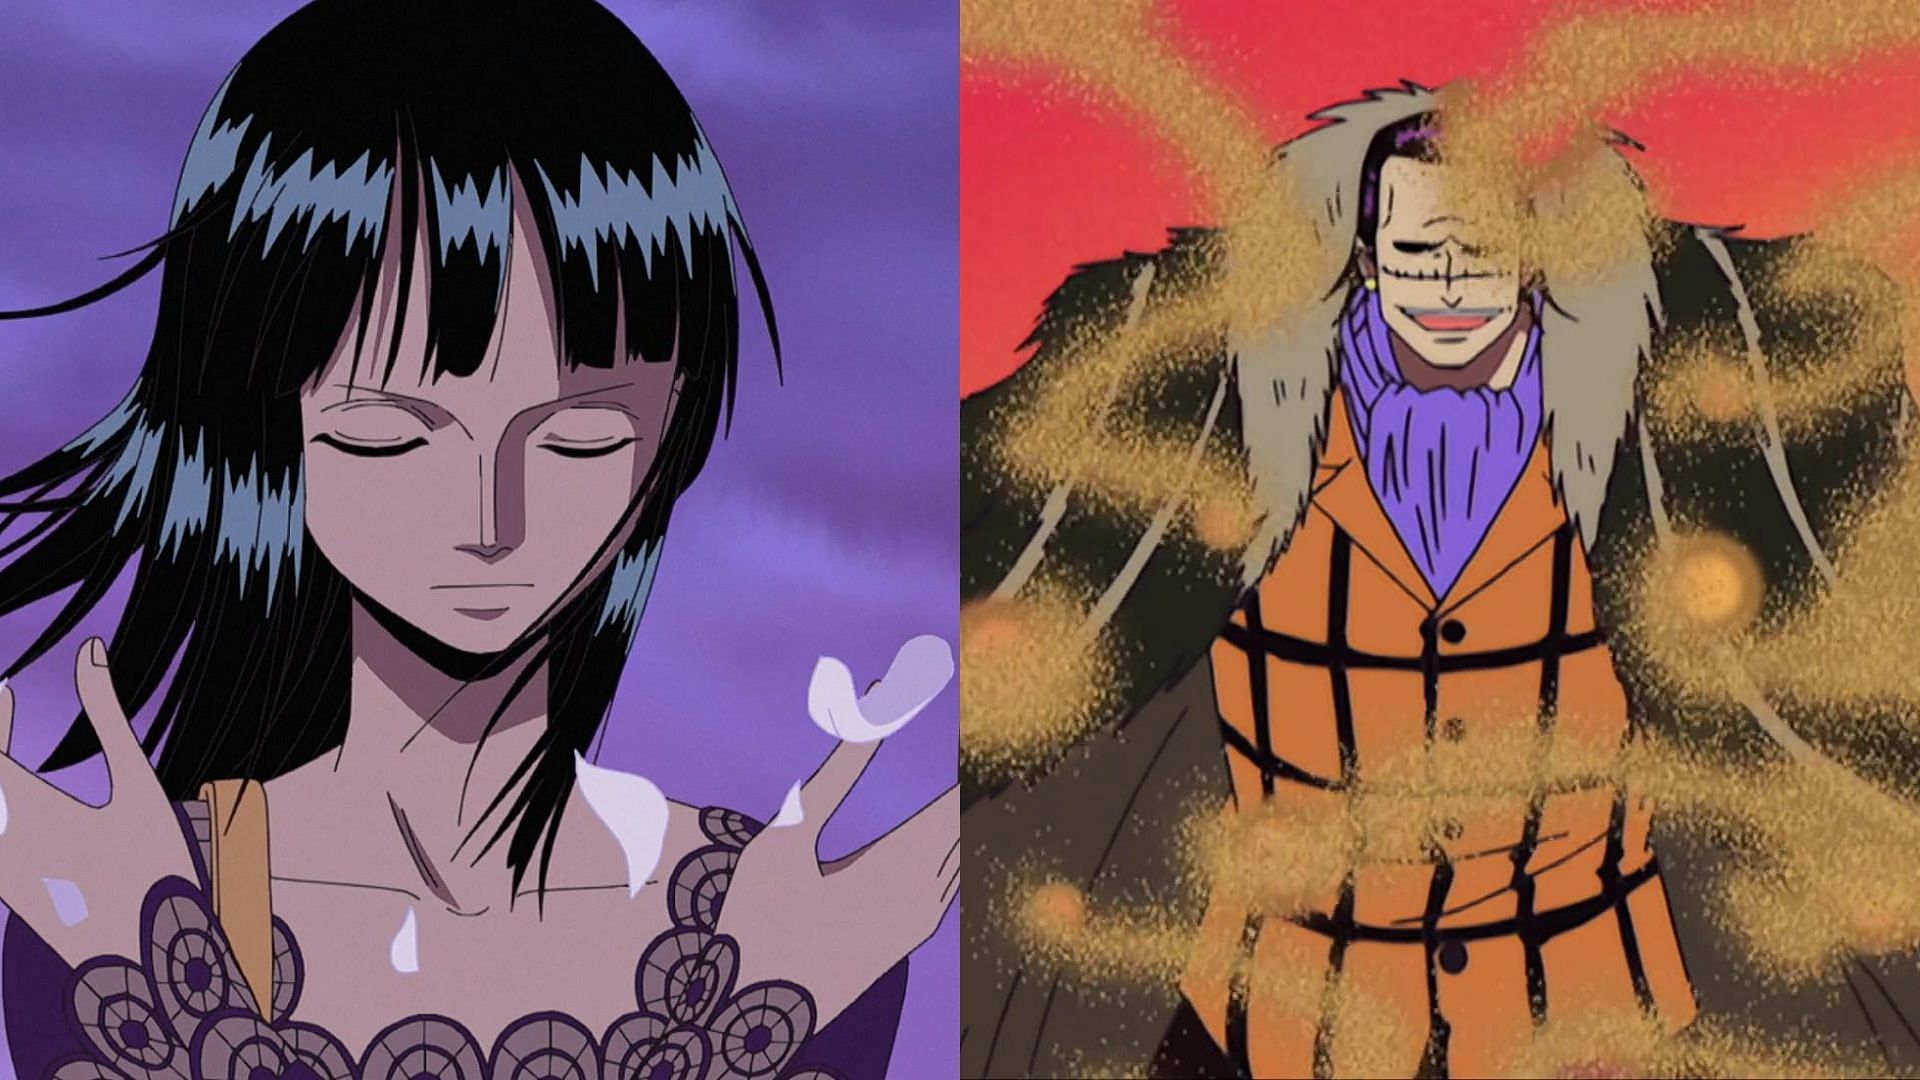 Robin and Crocodile using their Devil Fruits as seen in One Piece (Image via Toei Animation, One Piece)